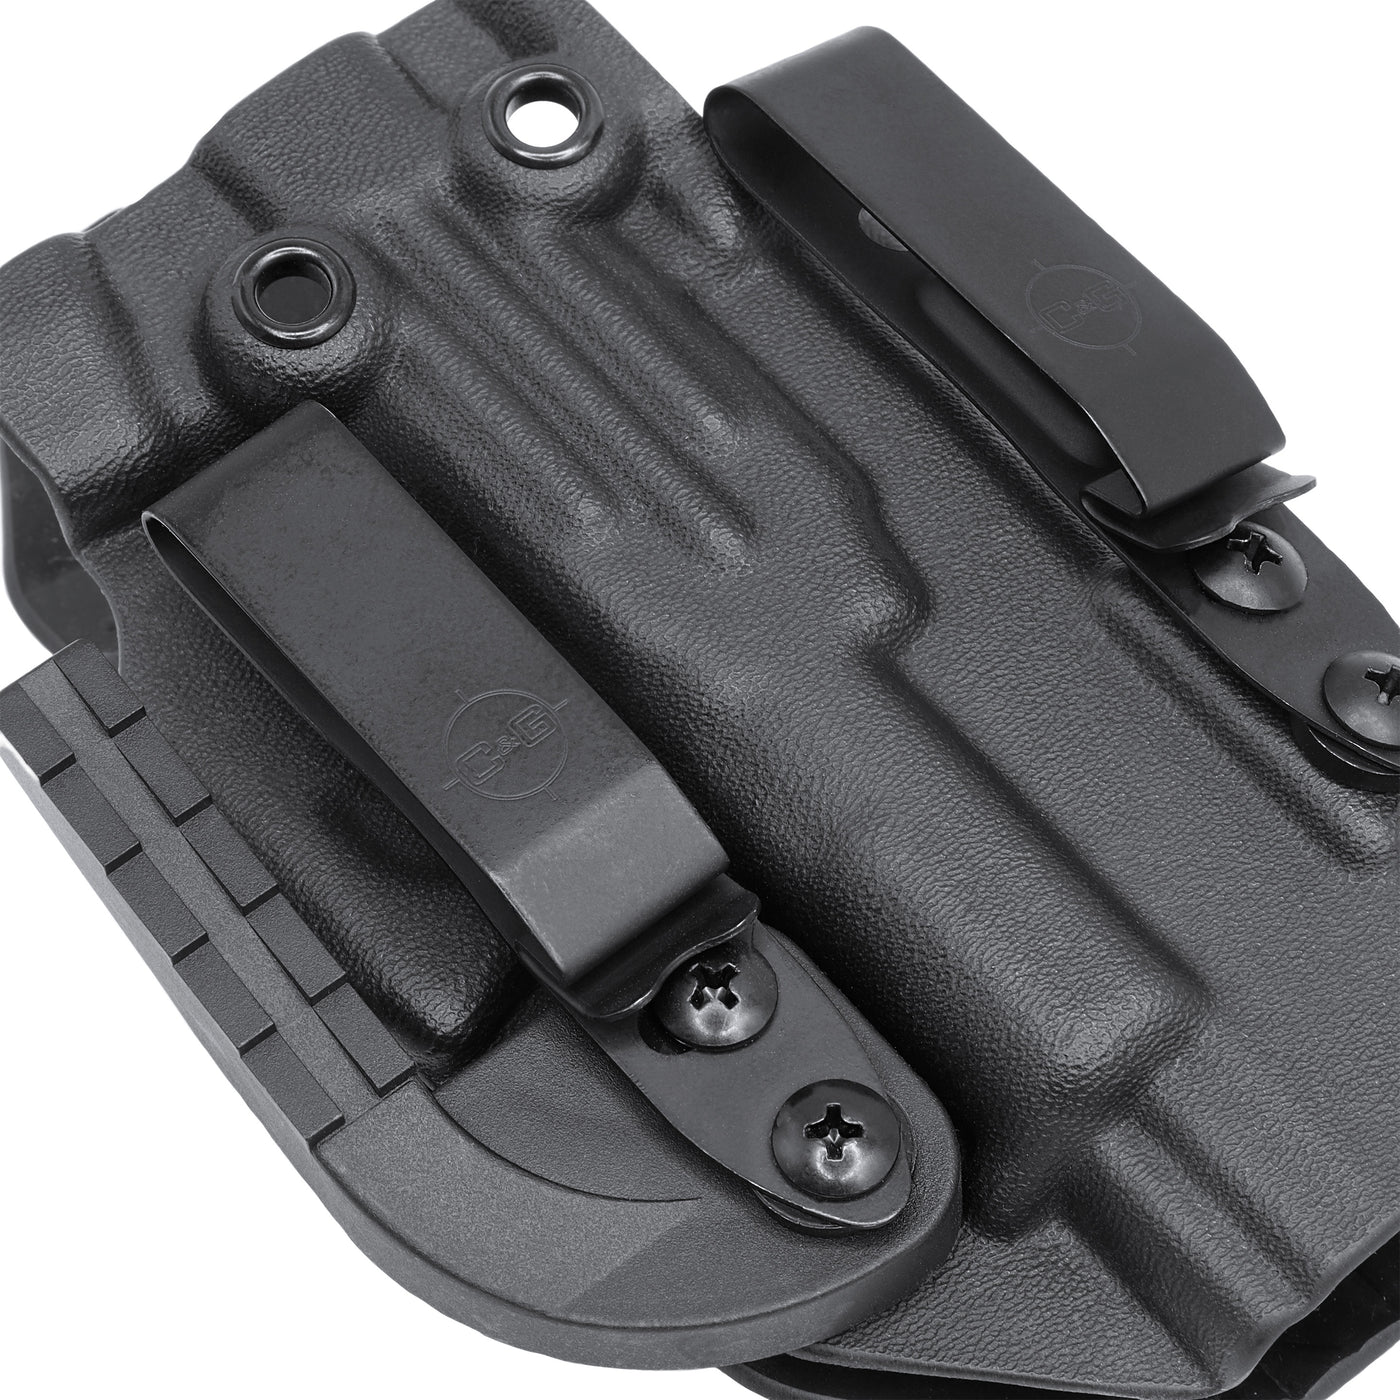 C&G Holsters 1.75” CNG Belt Clips on holster